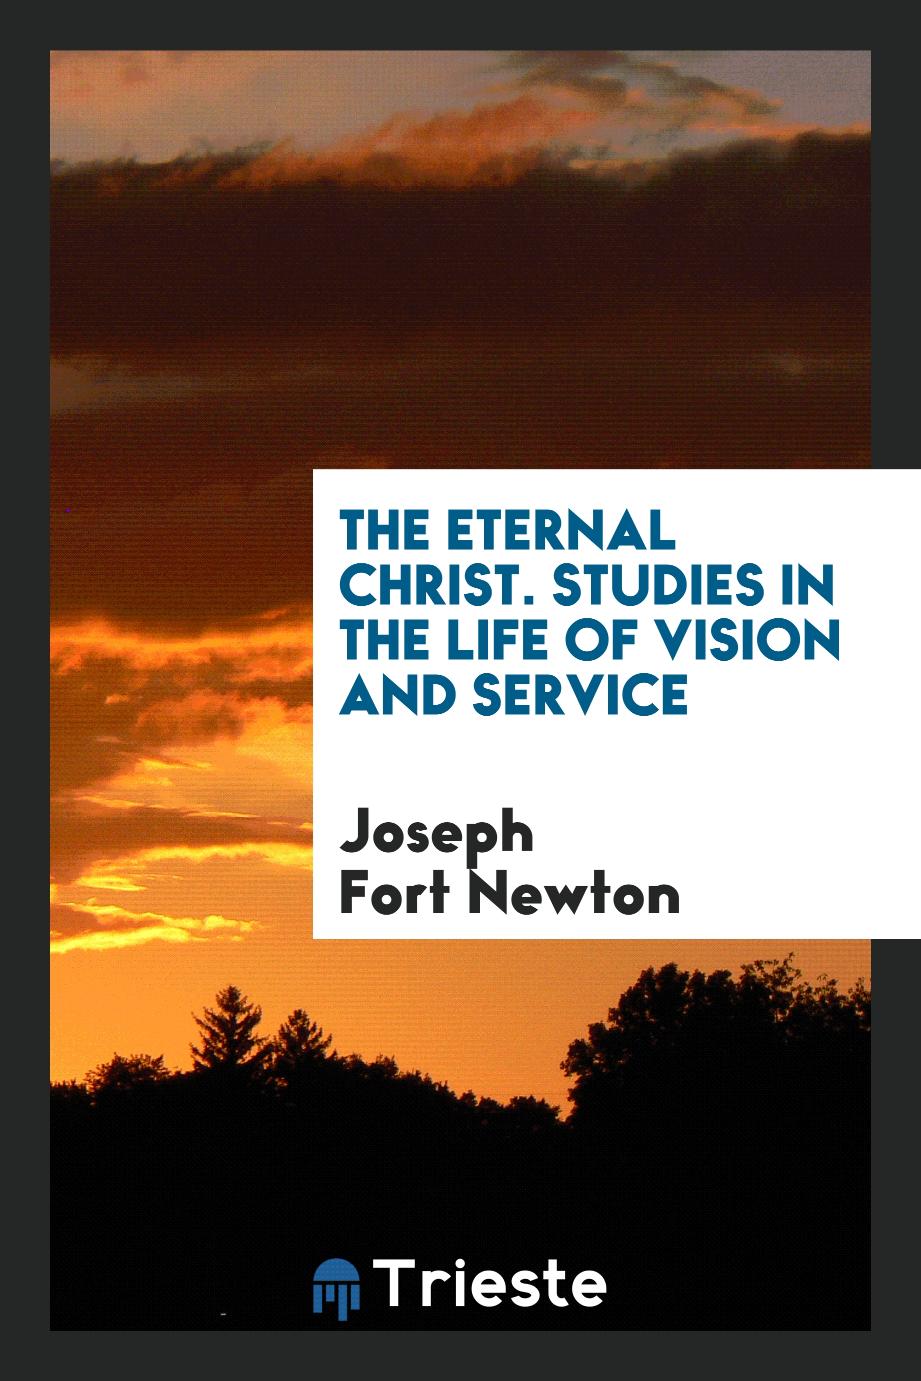 Joseph Fort Newton - The Eternal Christ. Studies in the Life of Vision and Service